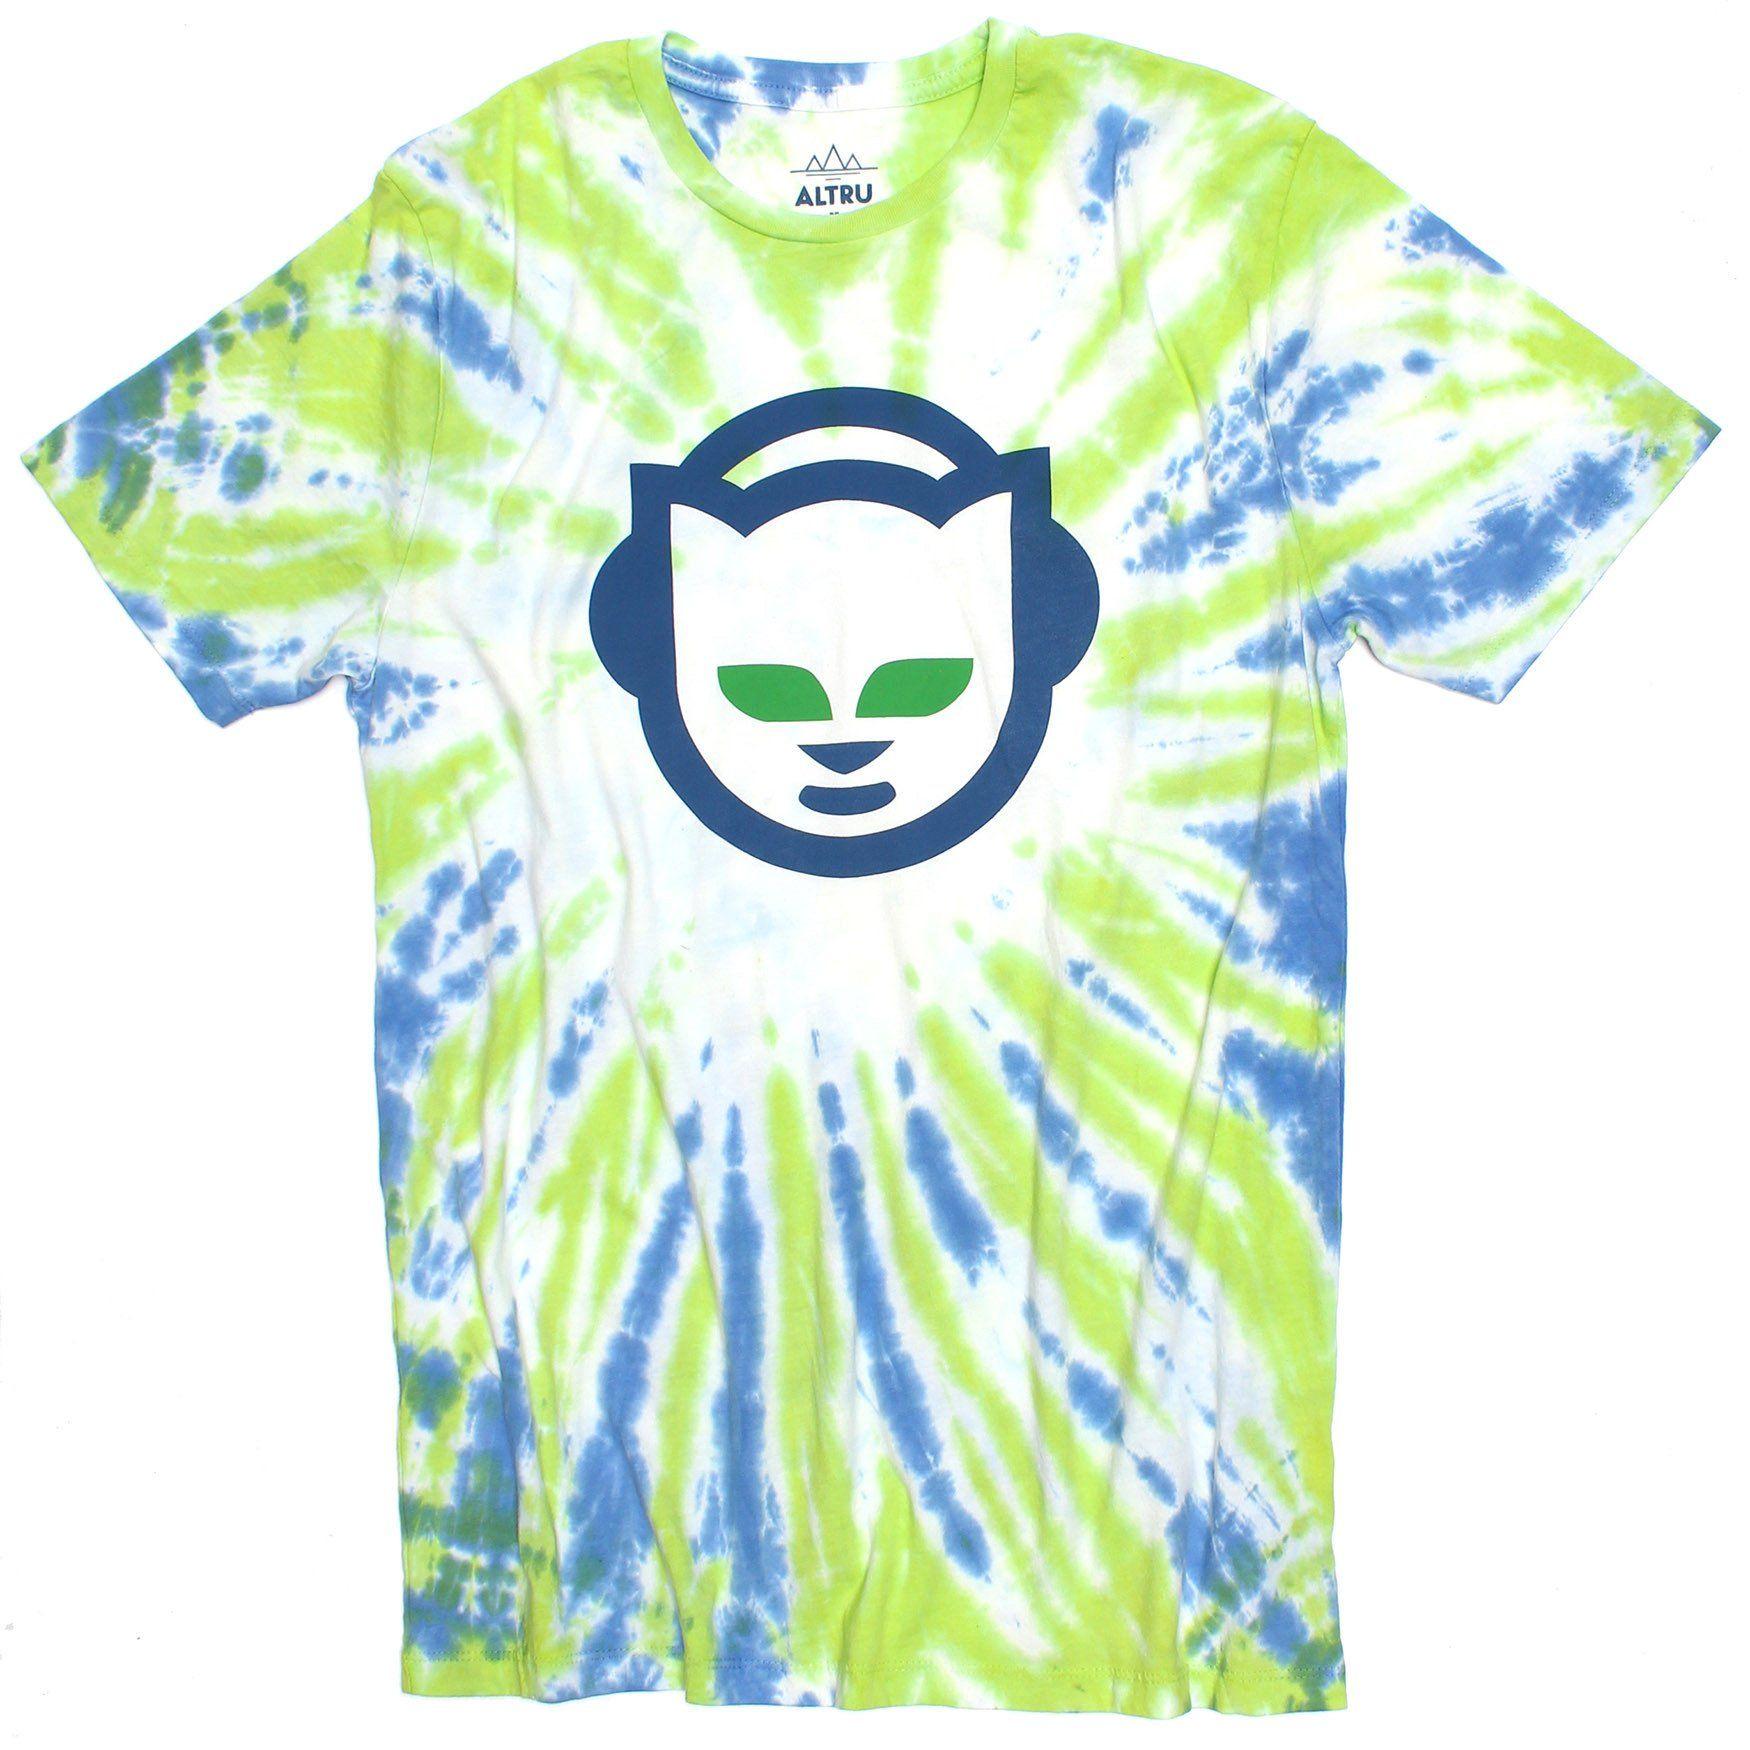 I Can Use Napster Logo - Napster Logo Tie Dye Graphic Tee (S Only) - Altru Apparel